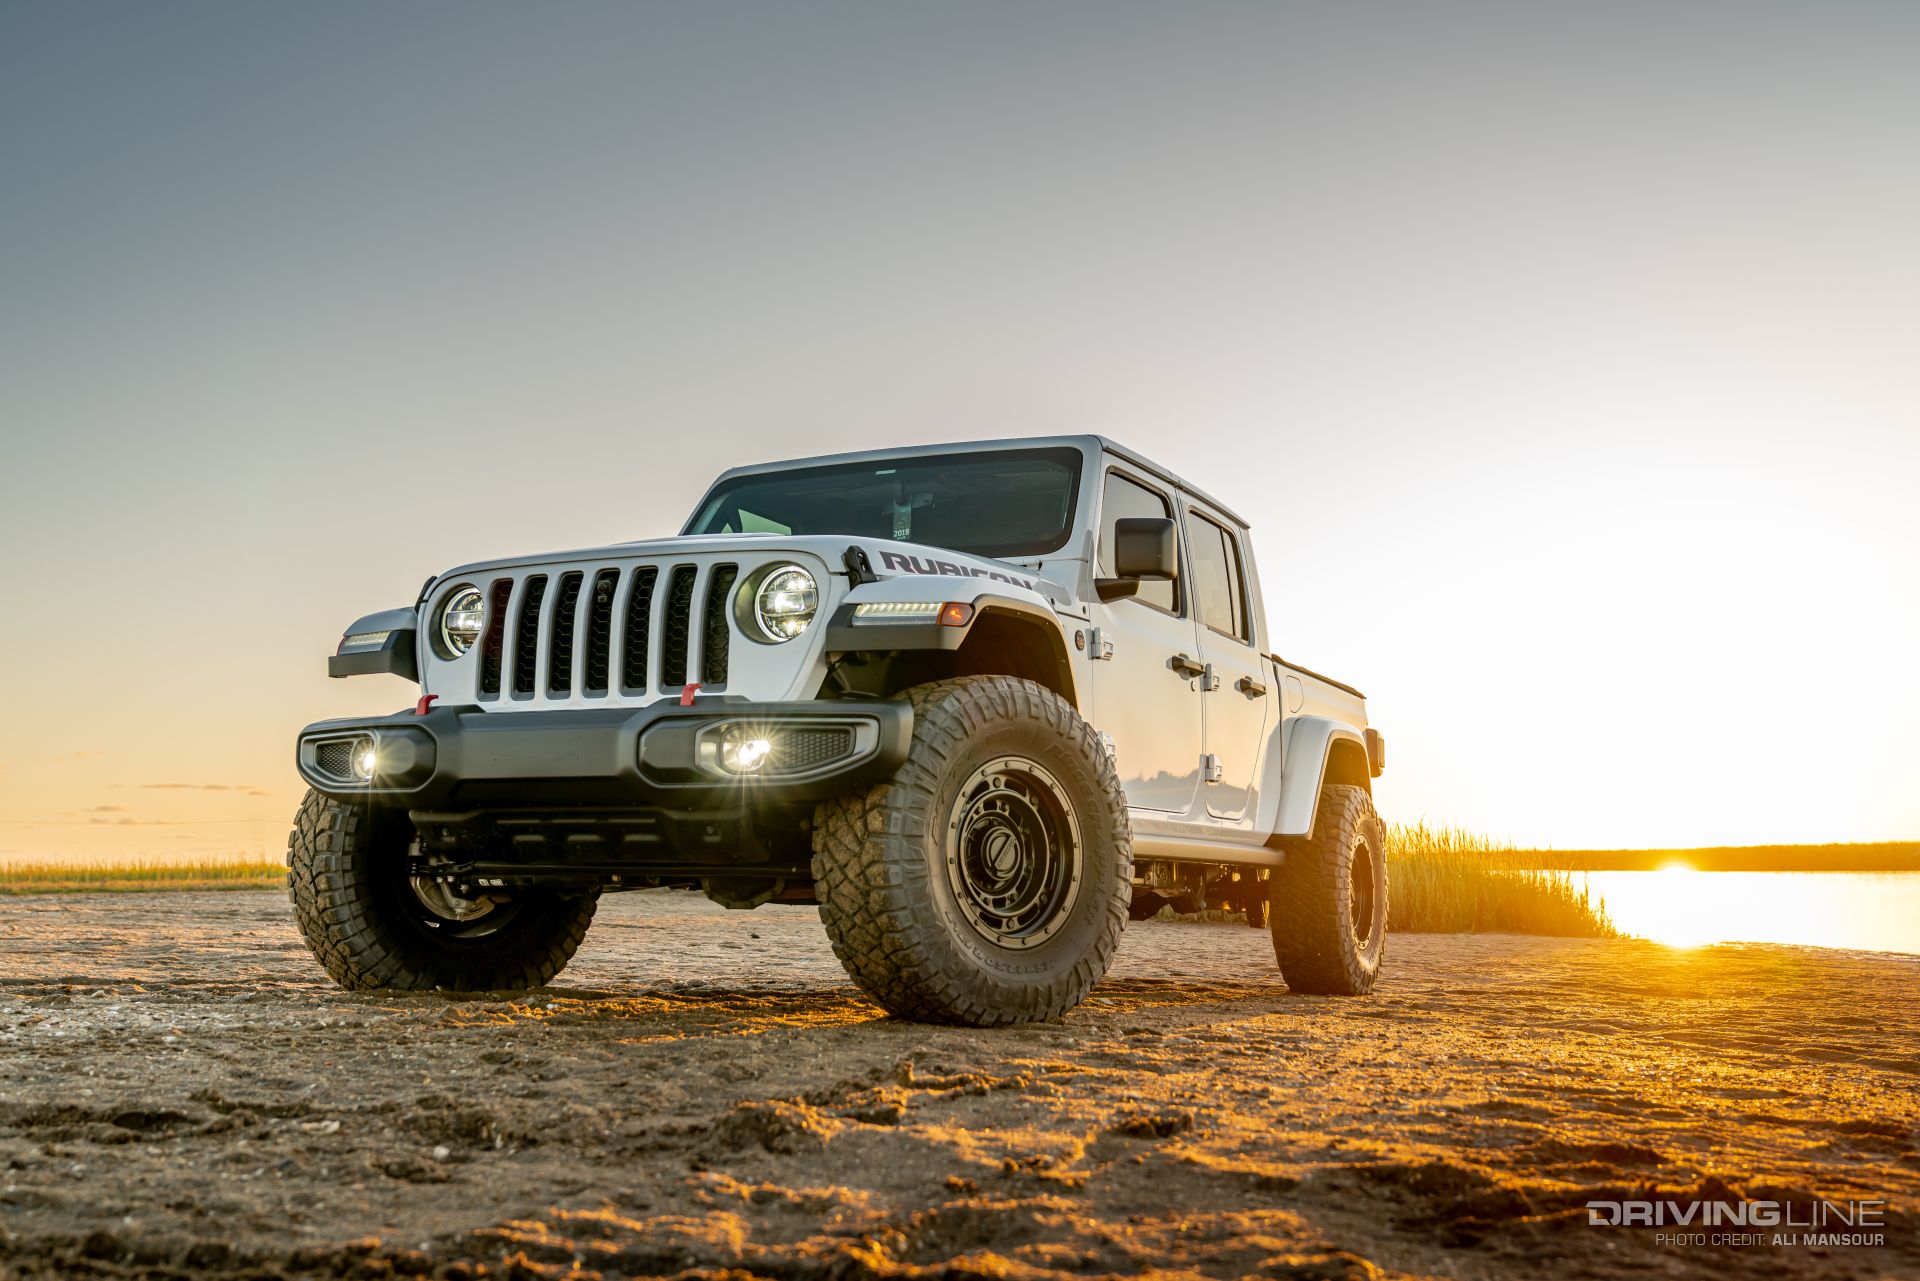 Gallery | Remington Off-Road Edition White 2019 Jeep 